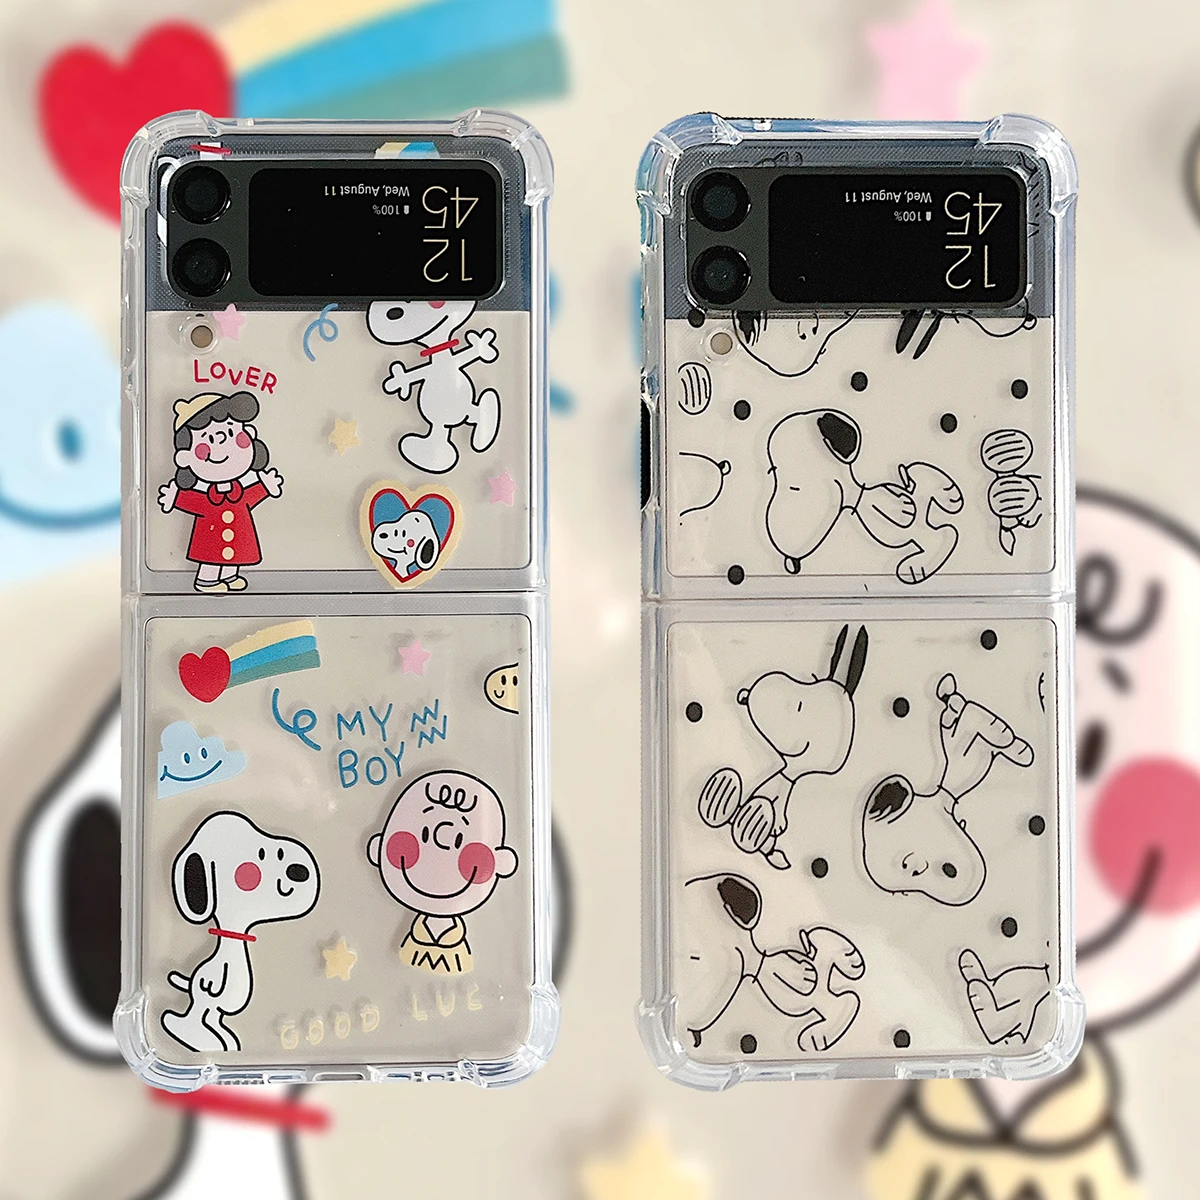 

Cartoon Charlie Brown Snoopy Phone Case For Samsung Z Flip 3 5G ZFlip3 Flip3 f7110 Soft For Galaxy Shockproof Transparent Cover